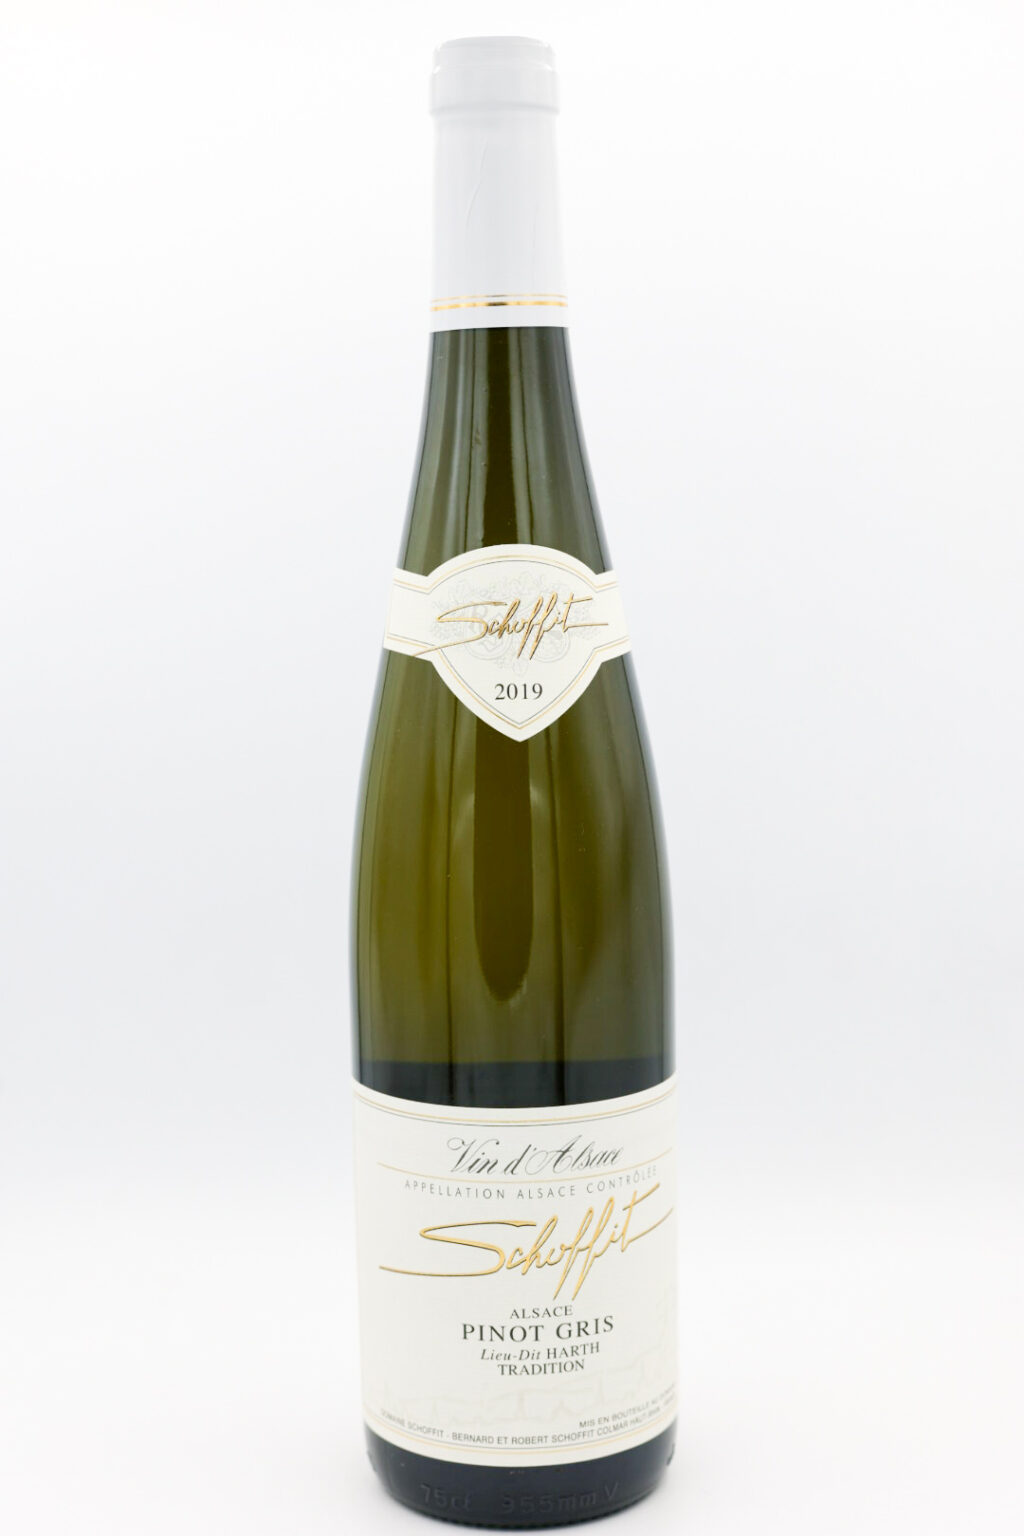 Domaine Schoffit “Harth Tradition” Pinot Gris 2019